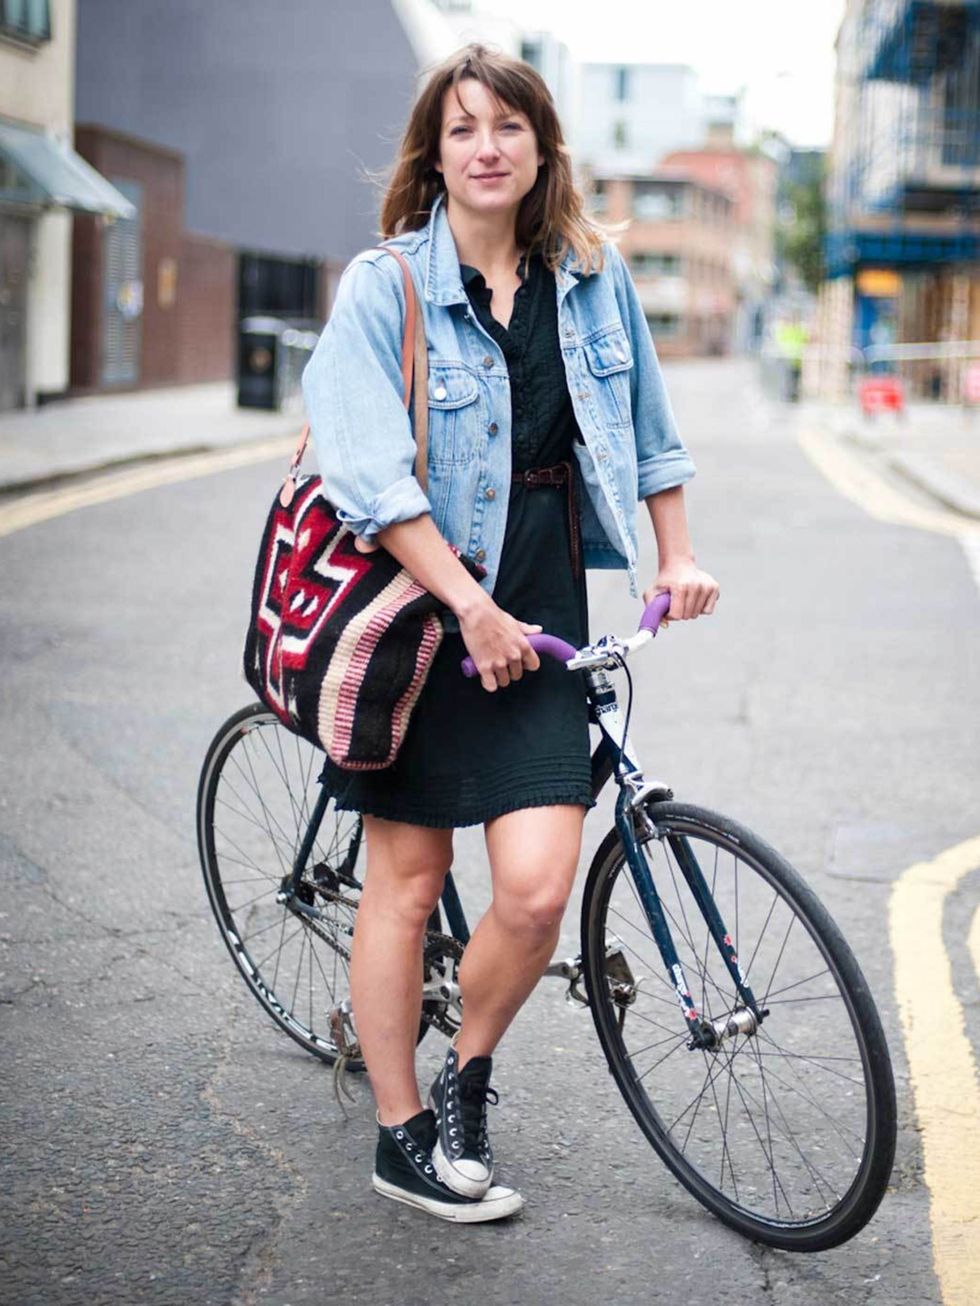 <p>Posy, 29. Charge bicycle, vintage jacket, dress from the Netherlands, Converse trainers, bag from San Francisco.</p><p>Photo by Stephanie Sian Smith</p>